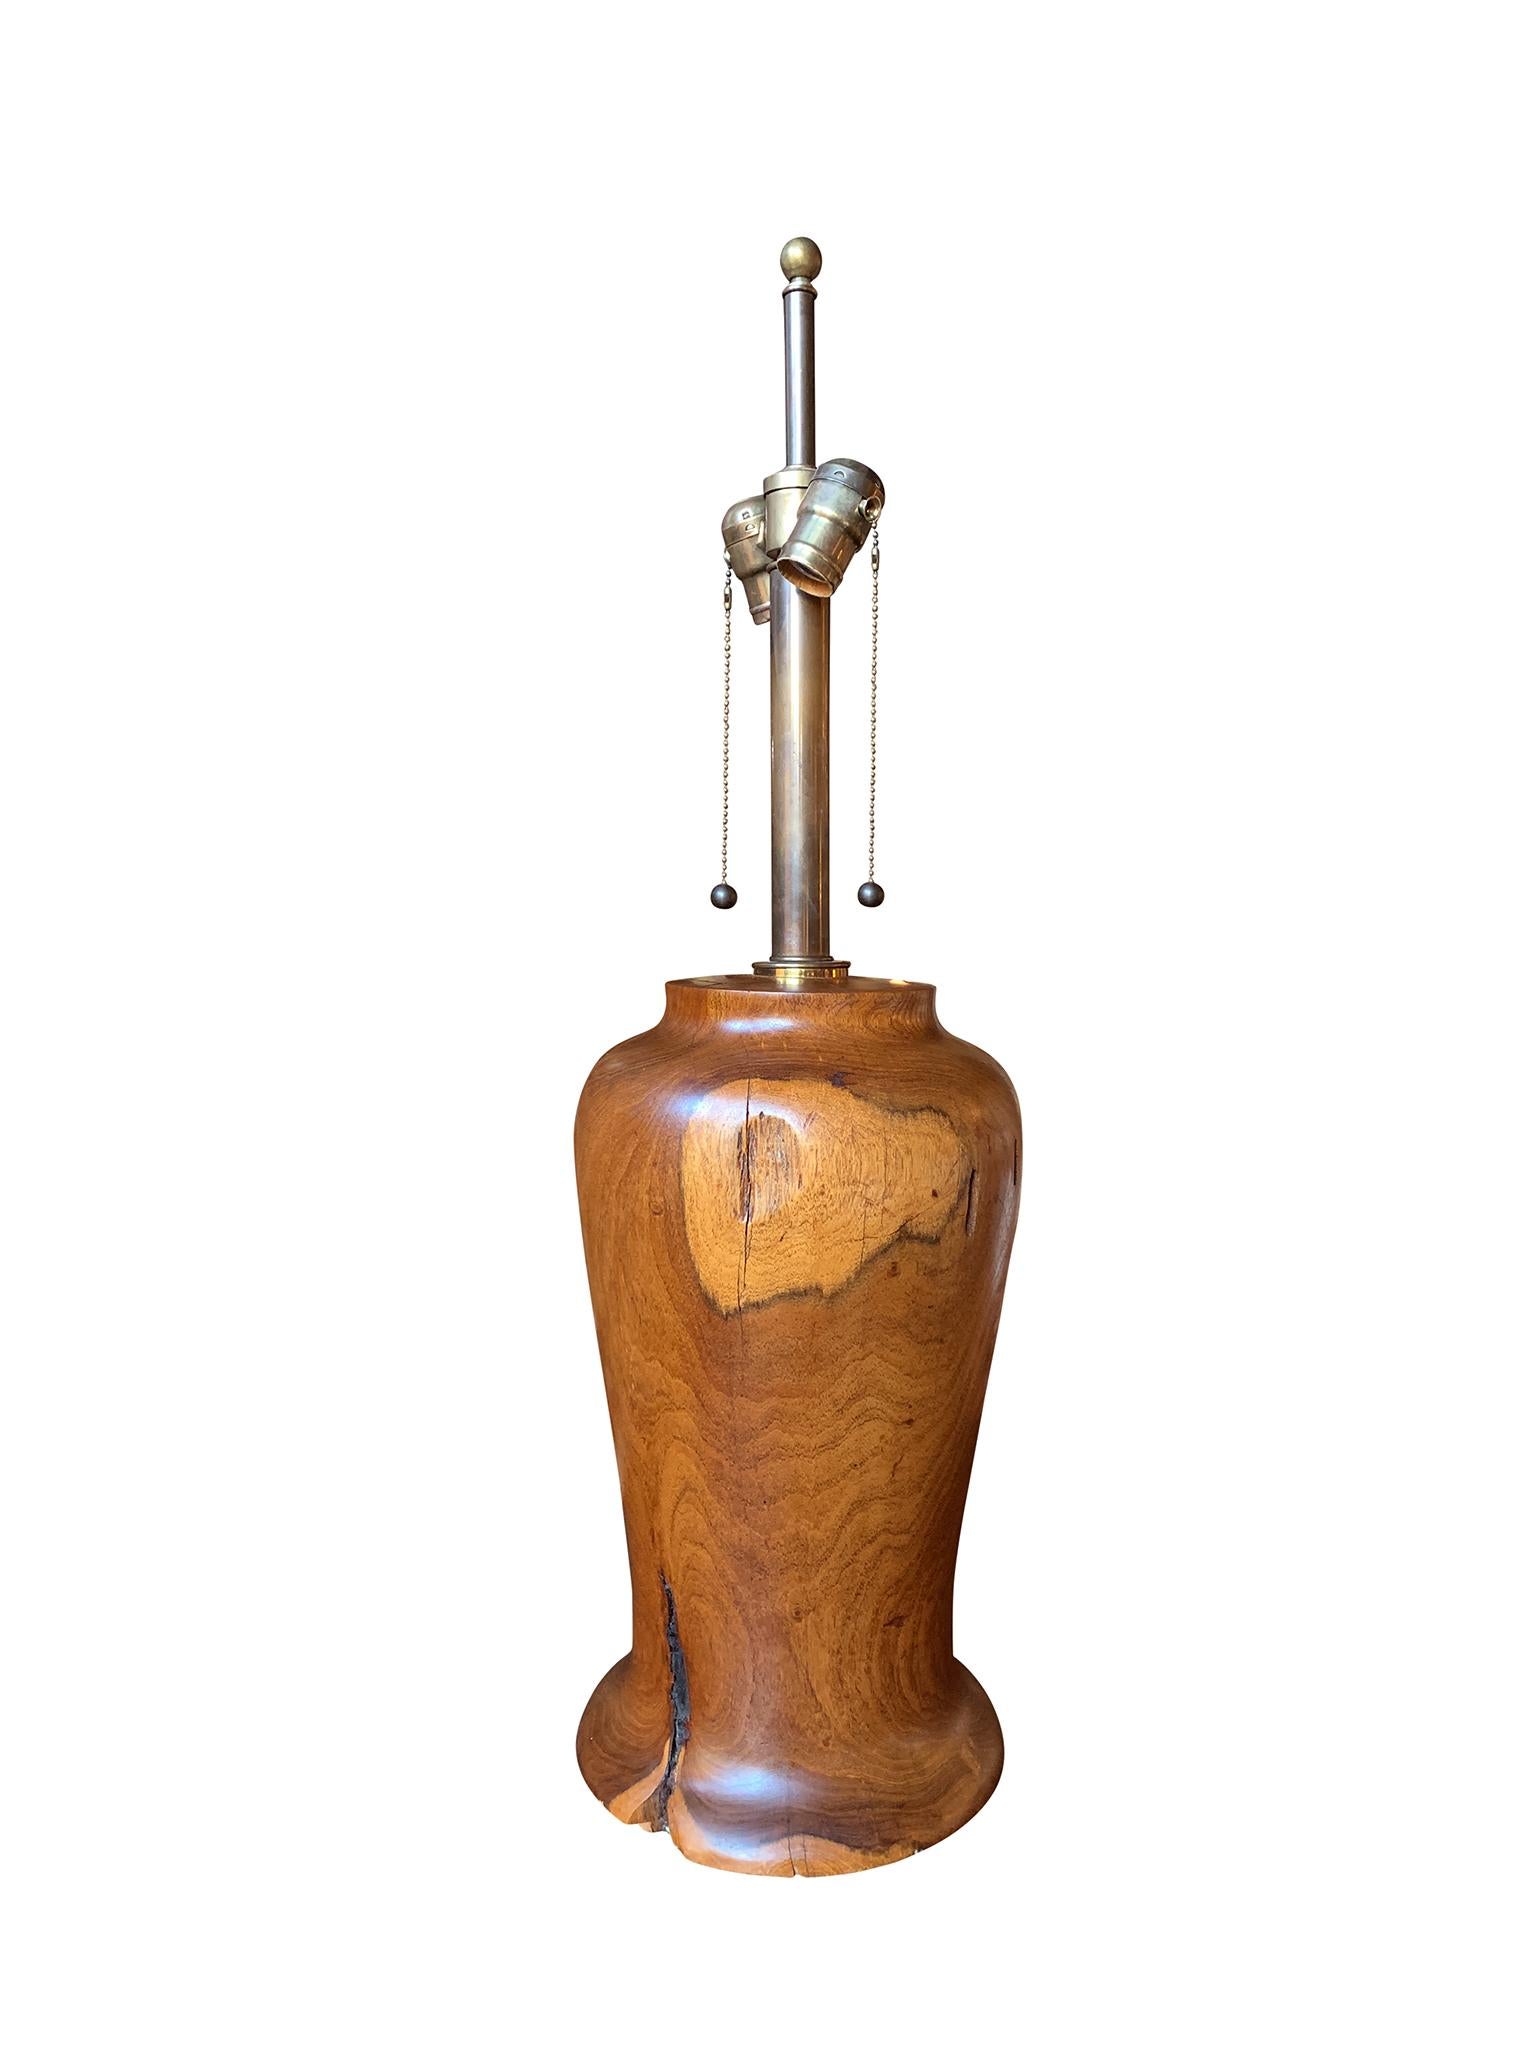 This 1940s American craftsman table lamp is hand-crafted from hardwood. The wood has a beautiful, warm patina and organic wear that adds character to the lamp. Newly rewired, the lamp has a double cluster bulb sockets with metal thread pulls. It is